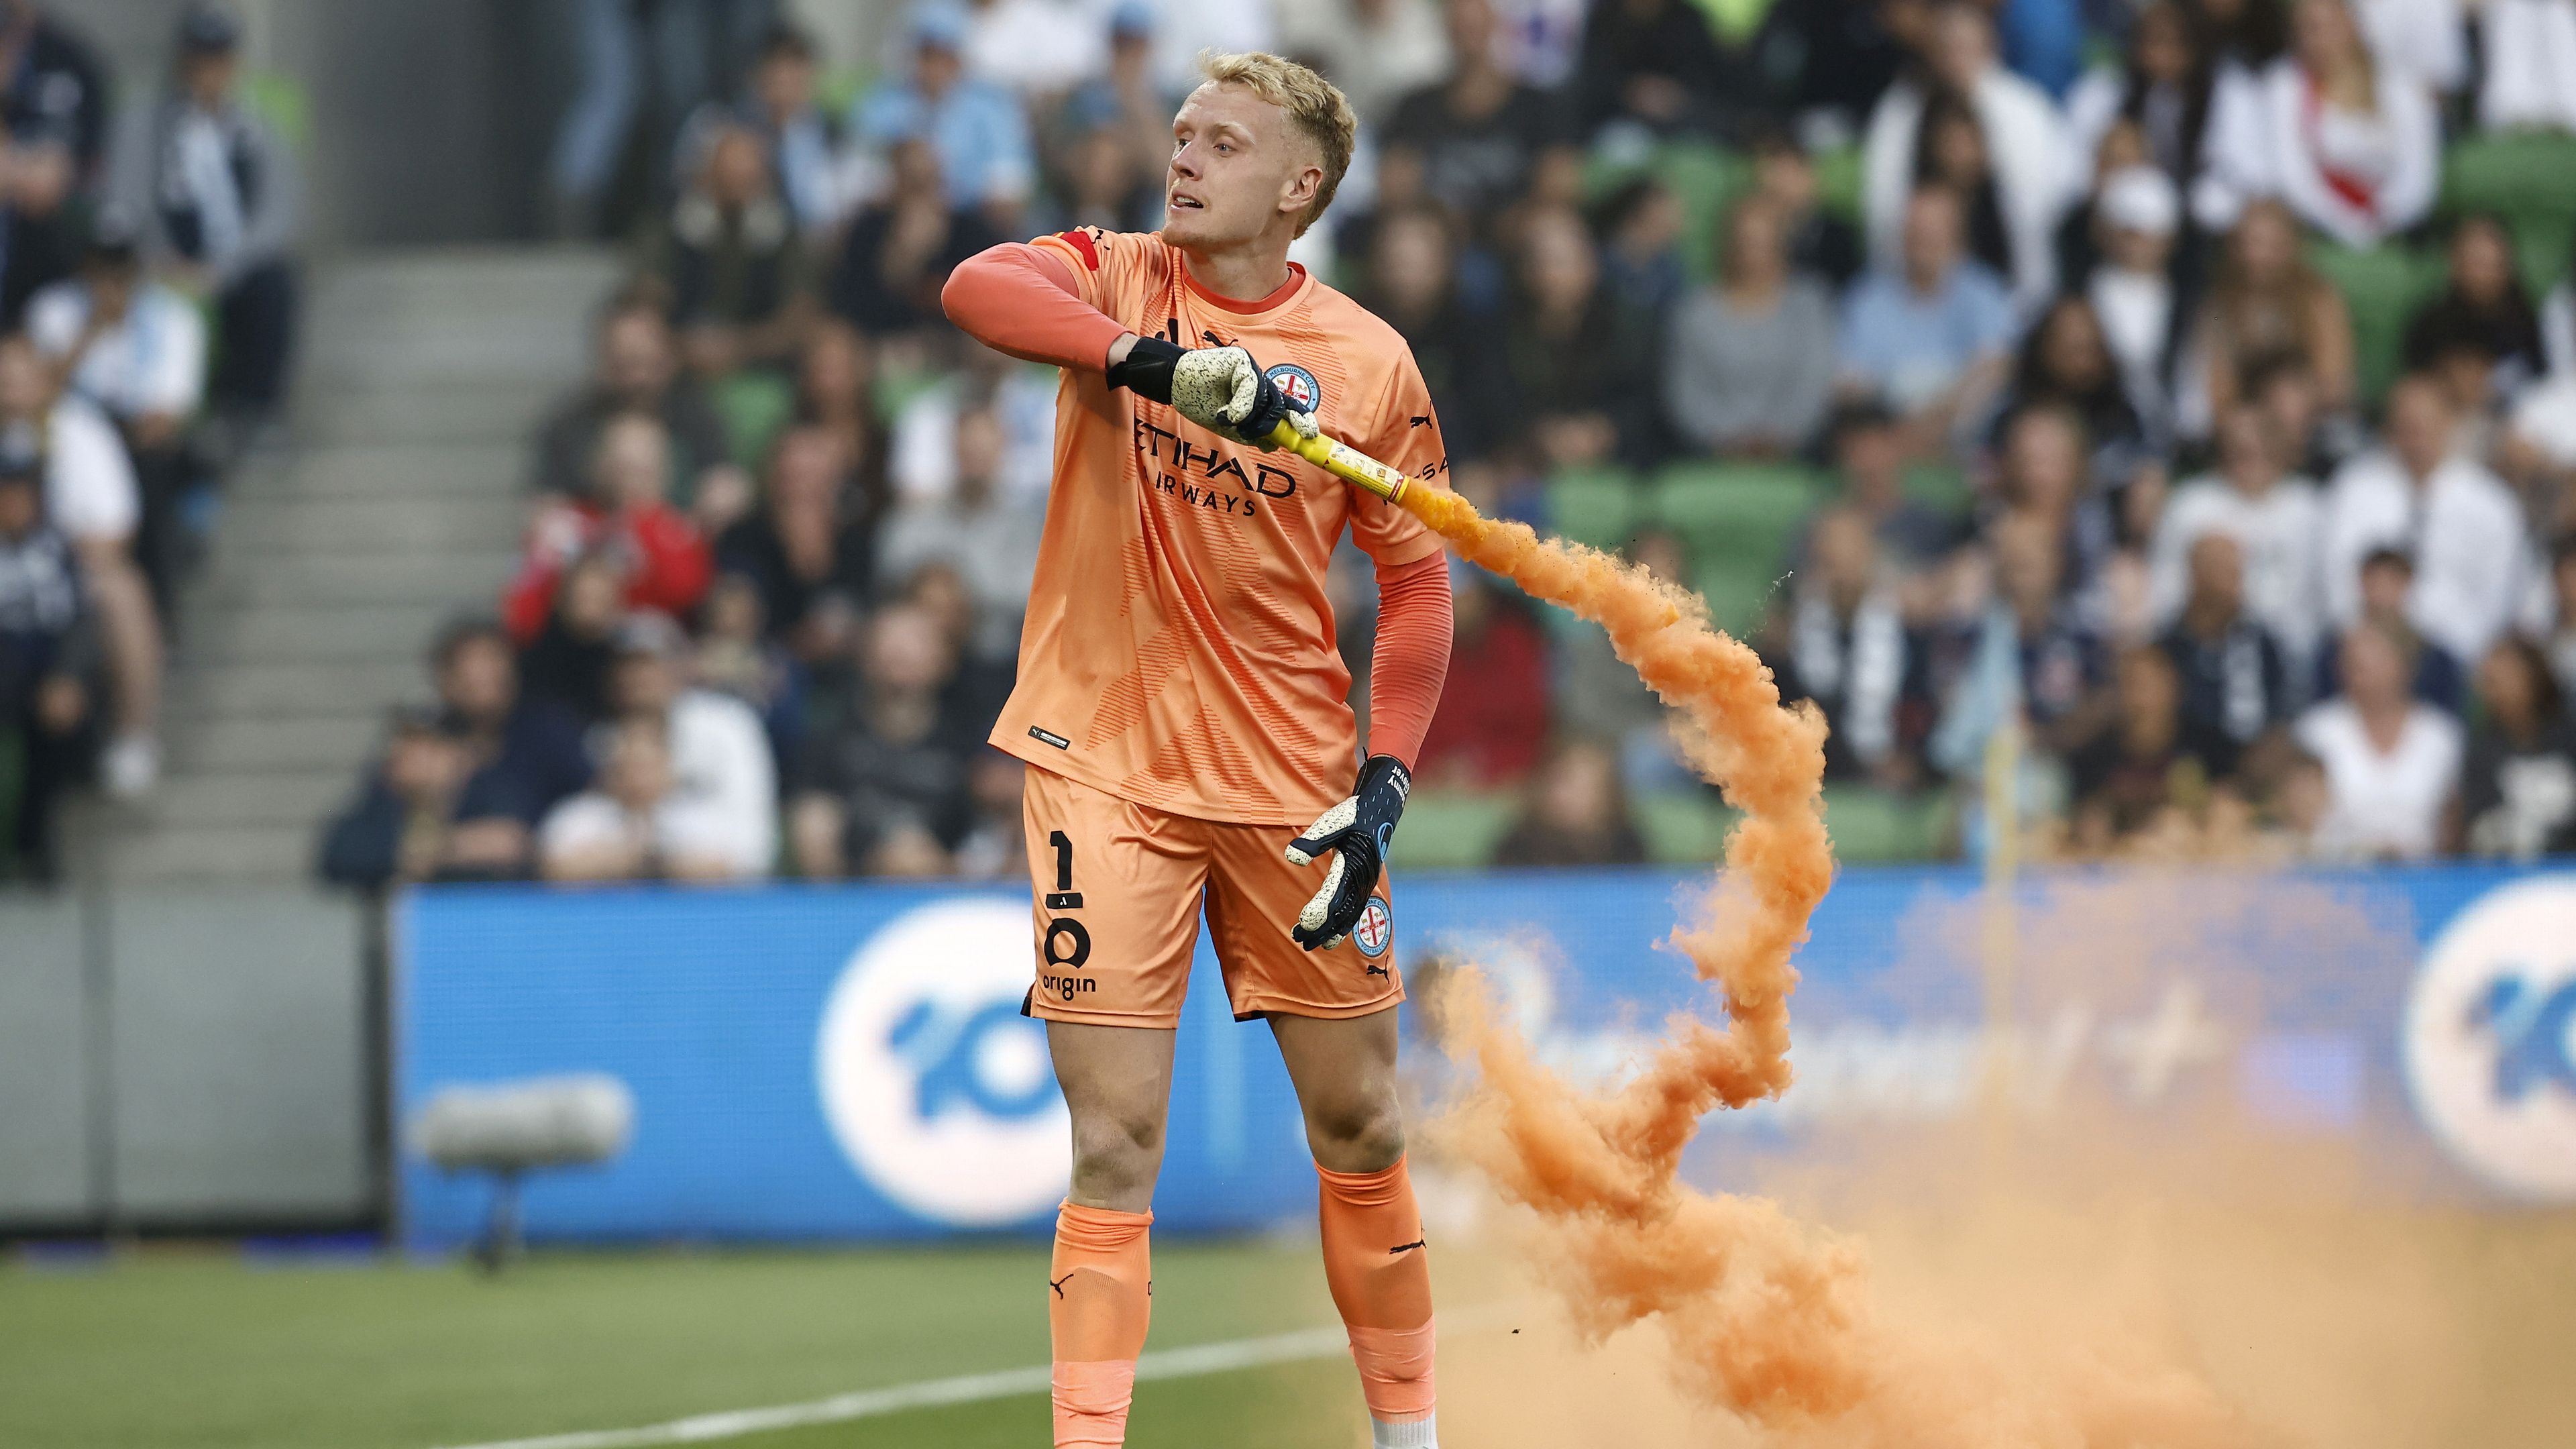 Melbourne City goalkeeper cleared over flare throw that ignited A-League pitch invasion